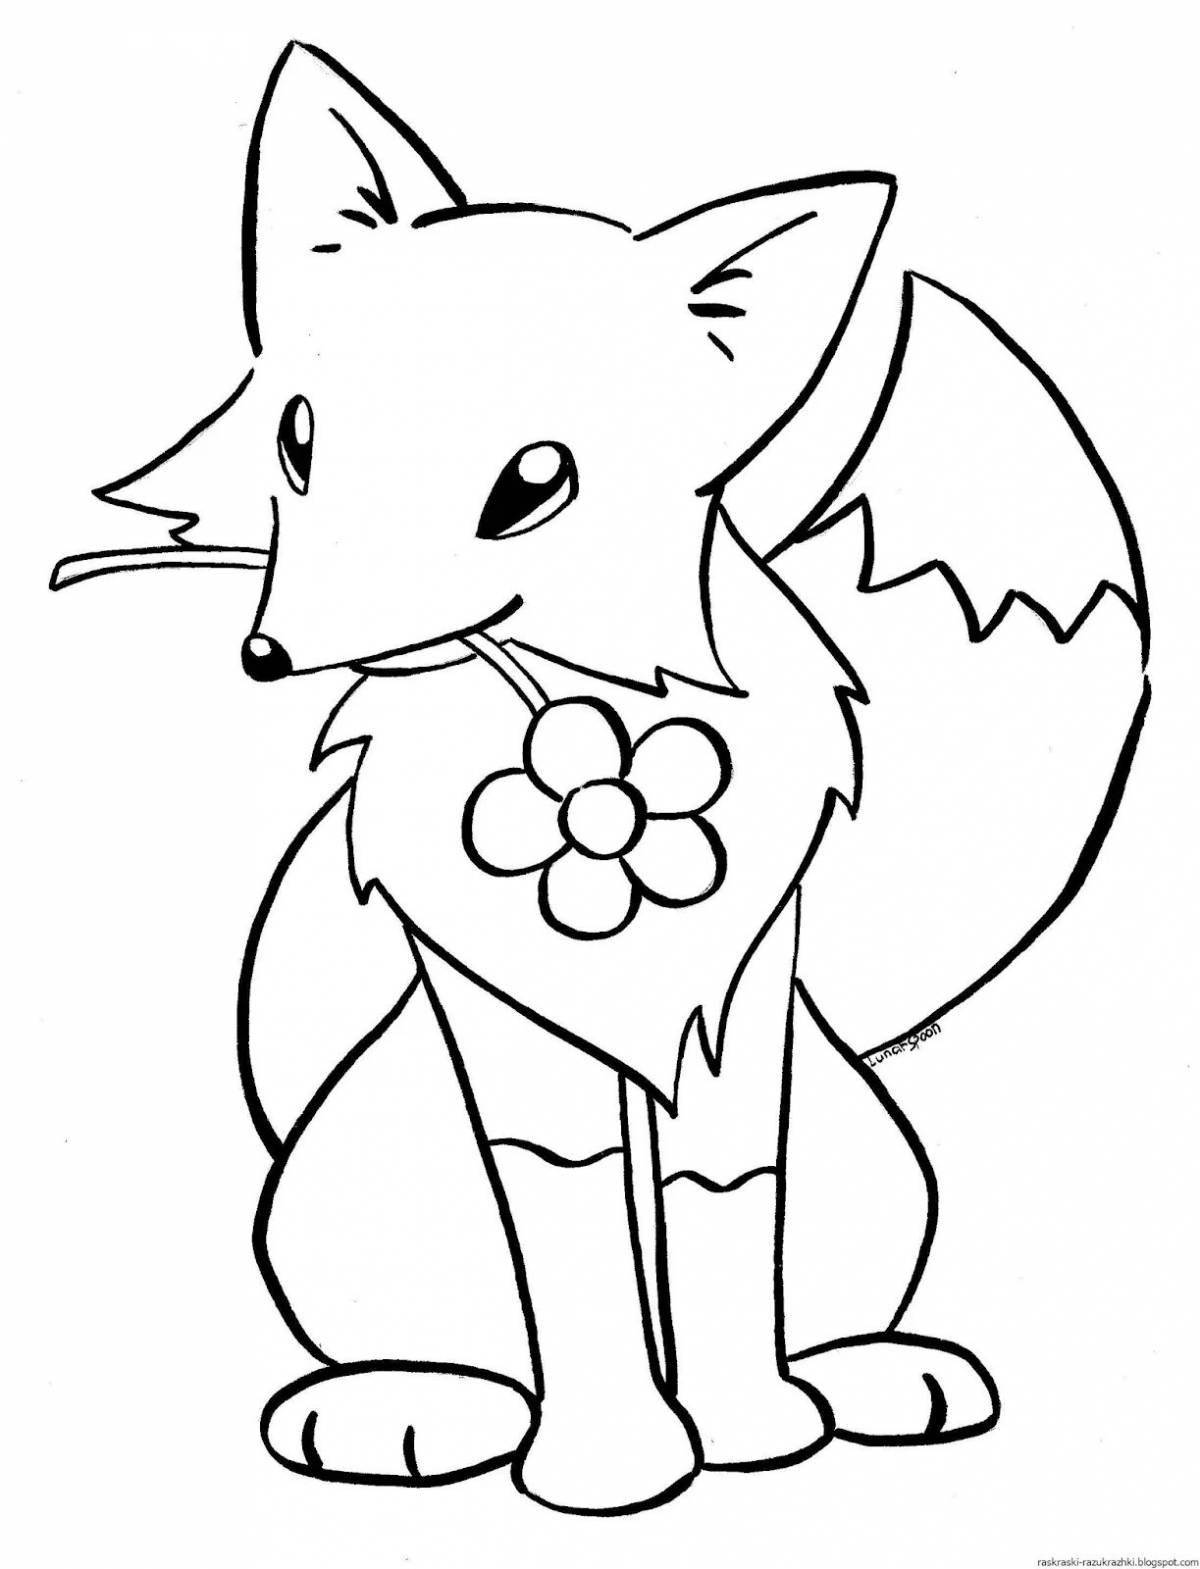 Glorious fox coloring pages for kids